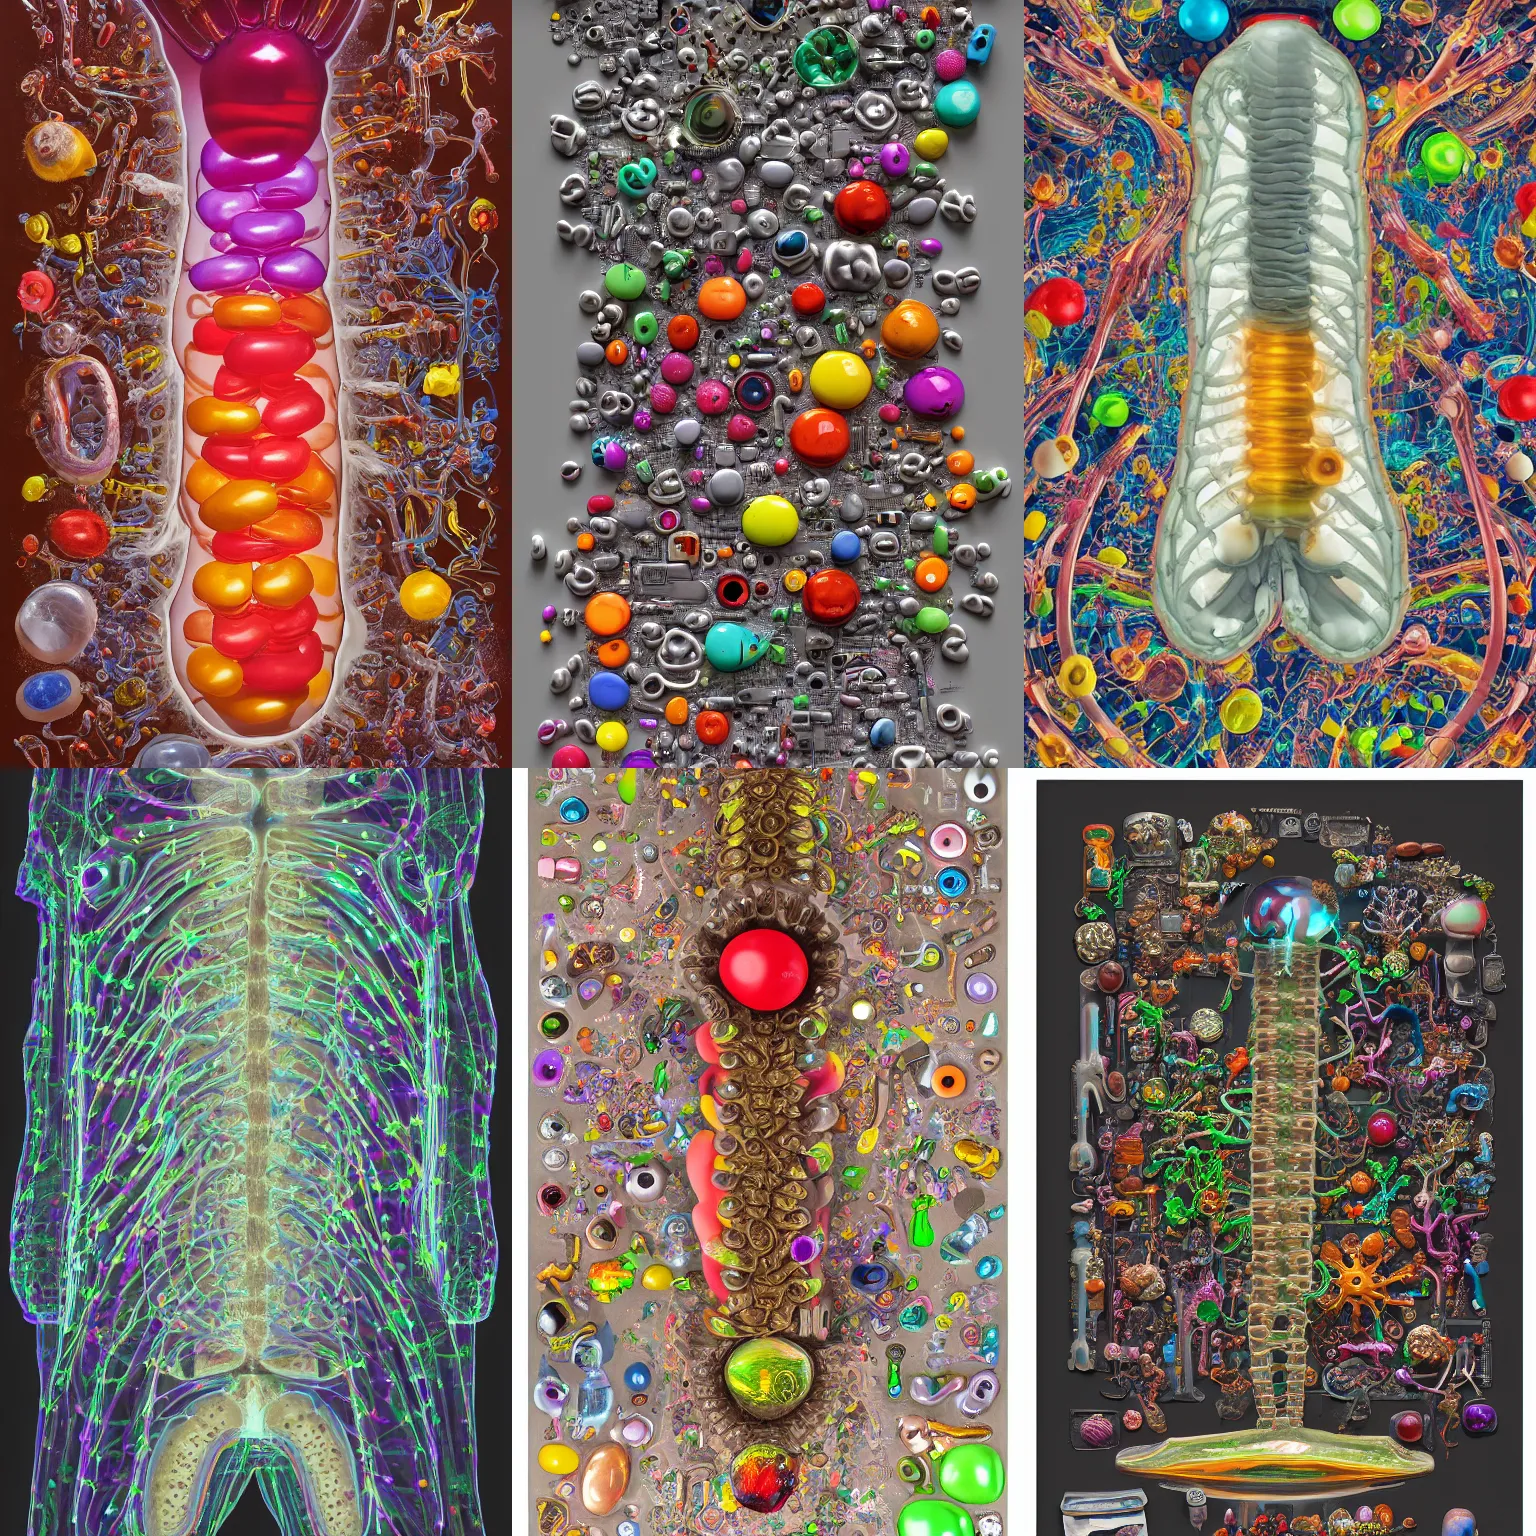 Prompt: Simple chromatic xray, bionic exploded drawing, crossection fungus sculpture, jellybeans, organs, kidney, by david lachapelle, by angus mckie, by rhads, in a dark empty black studio hollow, c4d, at night, rimlight, c4d, by jonathan ivy, by alex grey, Haeckel